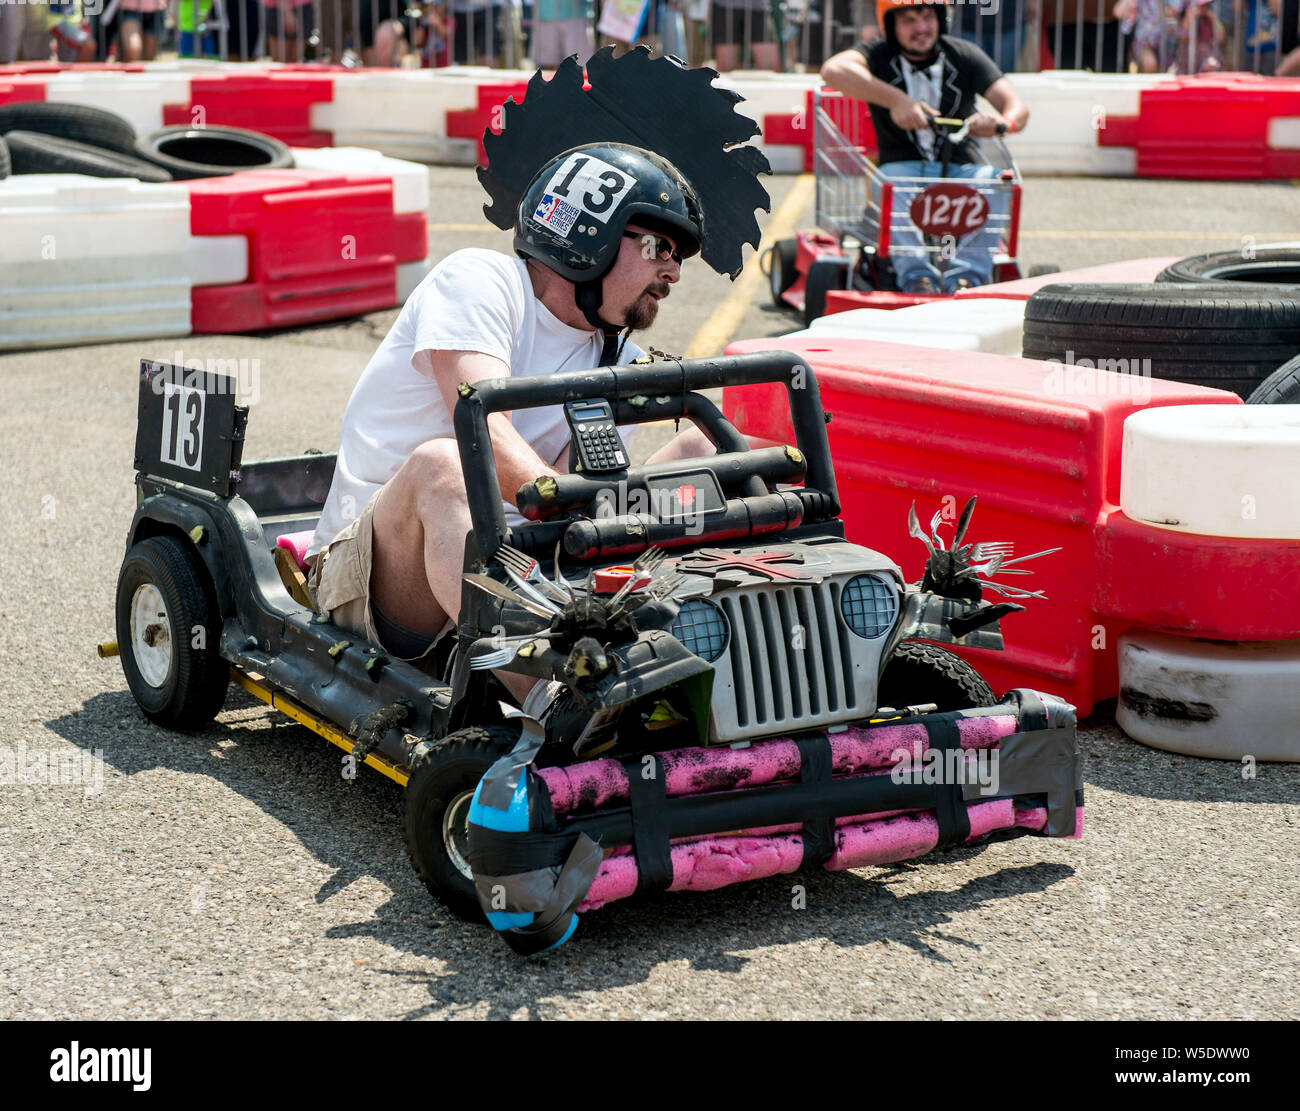 Dearborn, Michigan, USA. 28th July, 2019. Track action in the Power Racing Series during the 10th Annual Maker Faire Detroit at the Henry Ford Museum of American Innovation. Maker Faire is a gathering of tech enthusiasts, tinkerers, engineers and science club members who gather to show and share knowledge about what they've made. Credit: Brian Cahn/ZUMA Wire/Alamy Live News Stock Photo